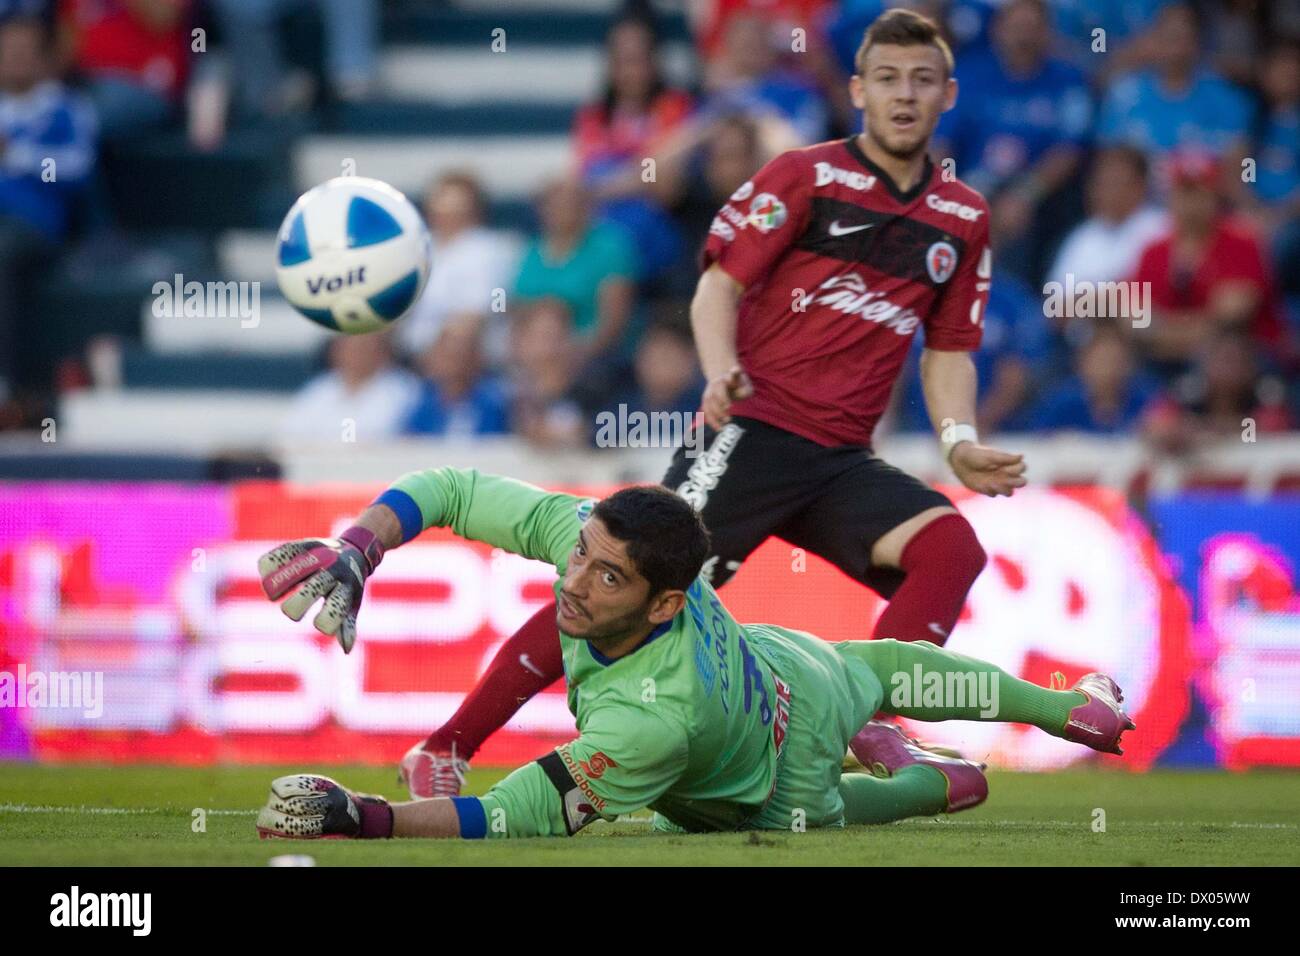 Mexico City, Mexico. 15th Mar, 2014. Cruz Azul's goalkeeper Jesus Corona (front) saves the ball during their match of the 2014 MX League Closing Tournament against Xolos, at Azul Stadium in Mexico City, capital of Mexico, on March 15, 2014. Credit:  Pedro Mera/Xinhua/Alamy Live News Stock Photo